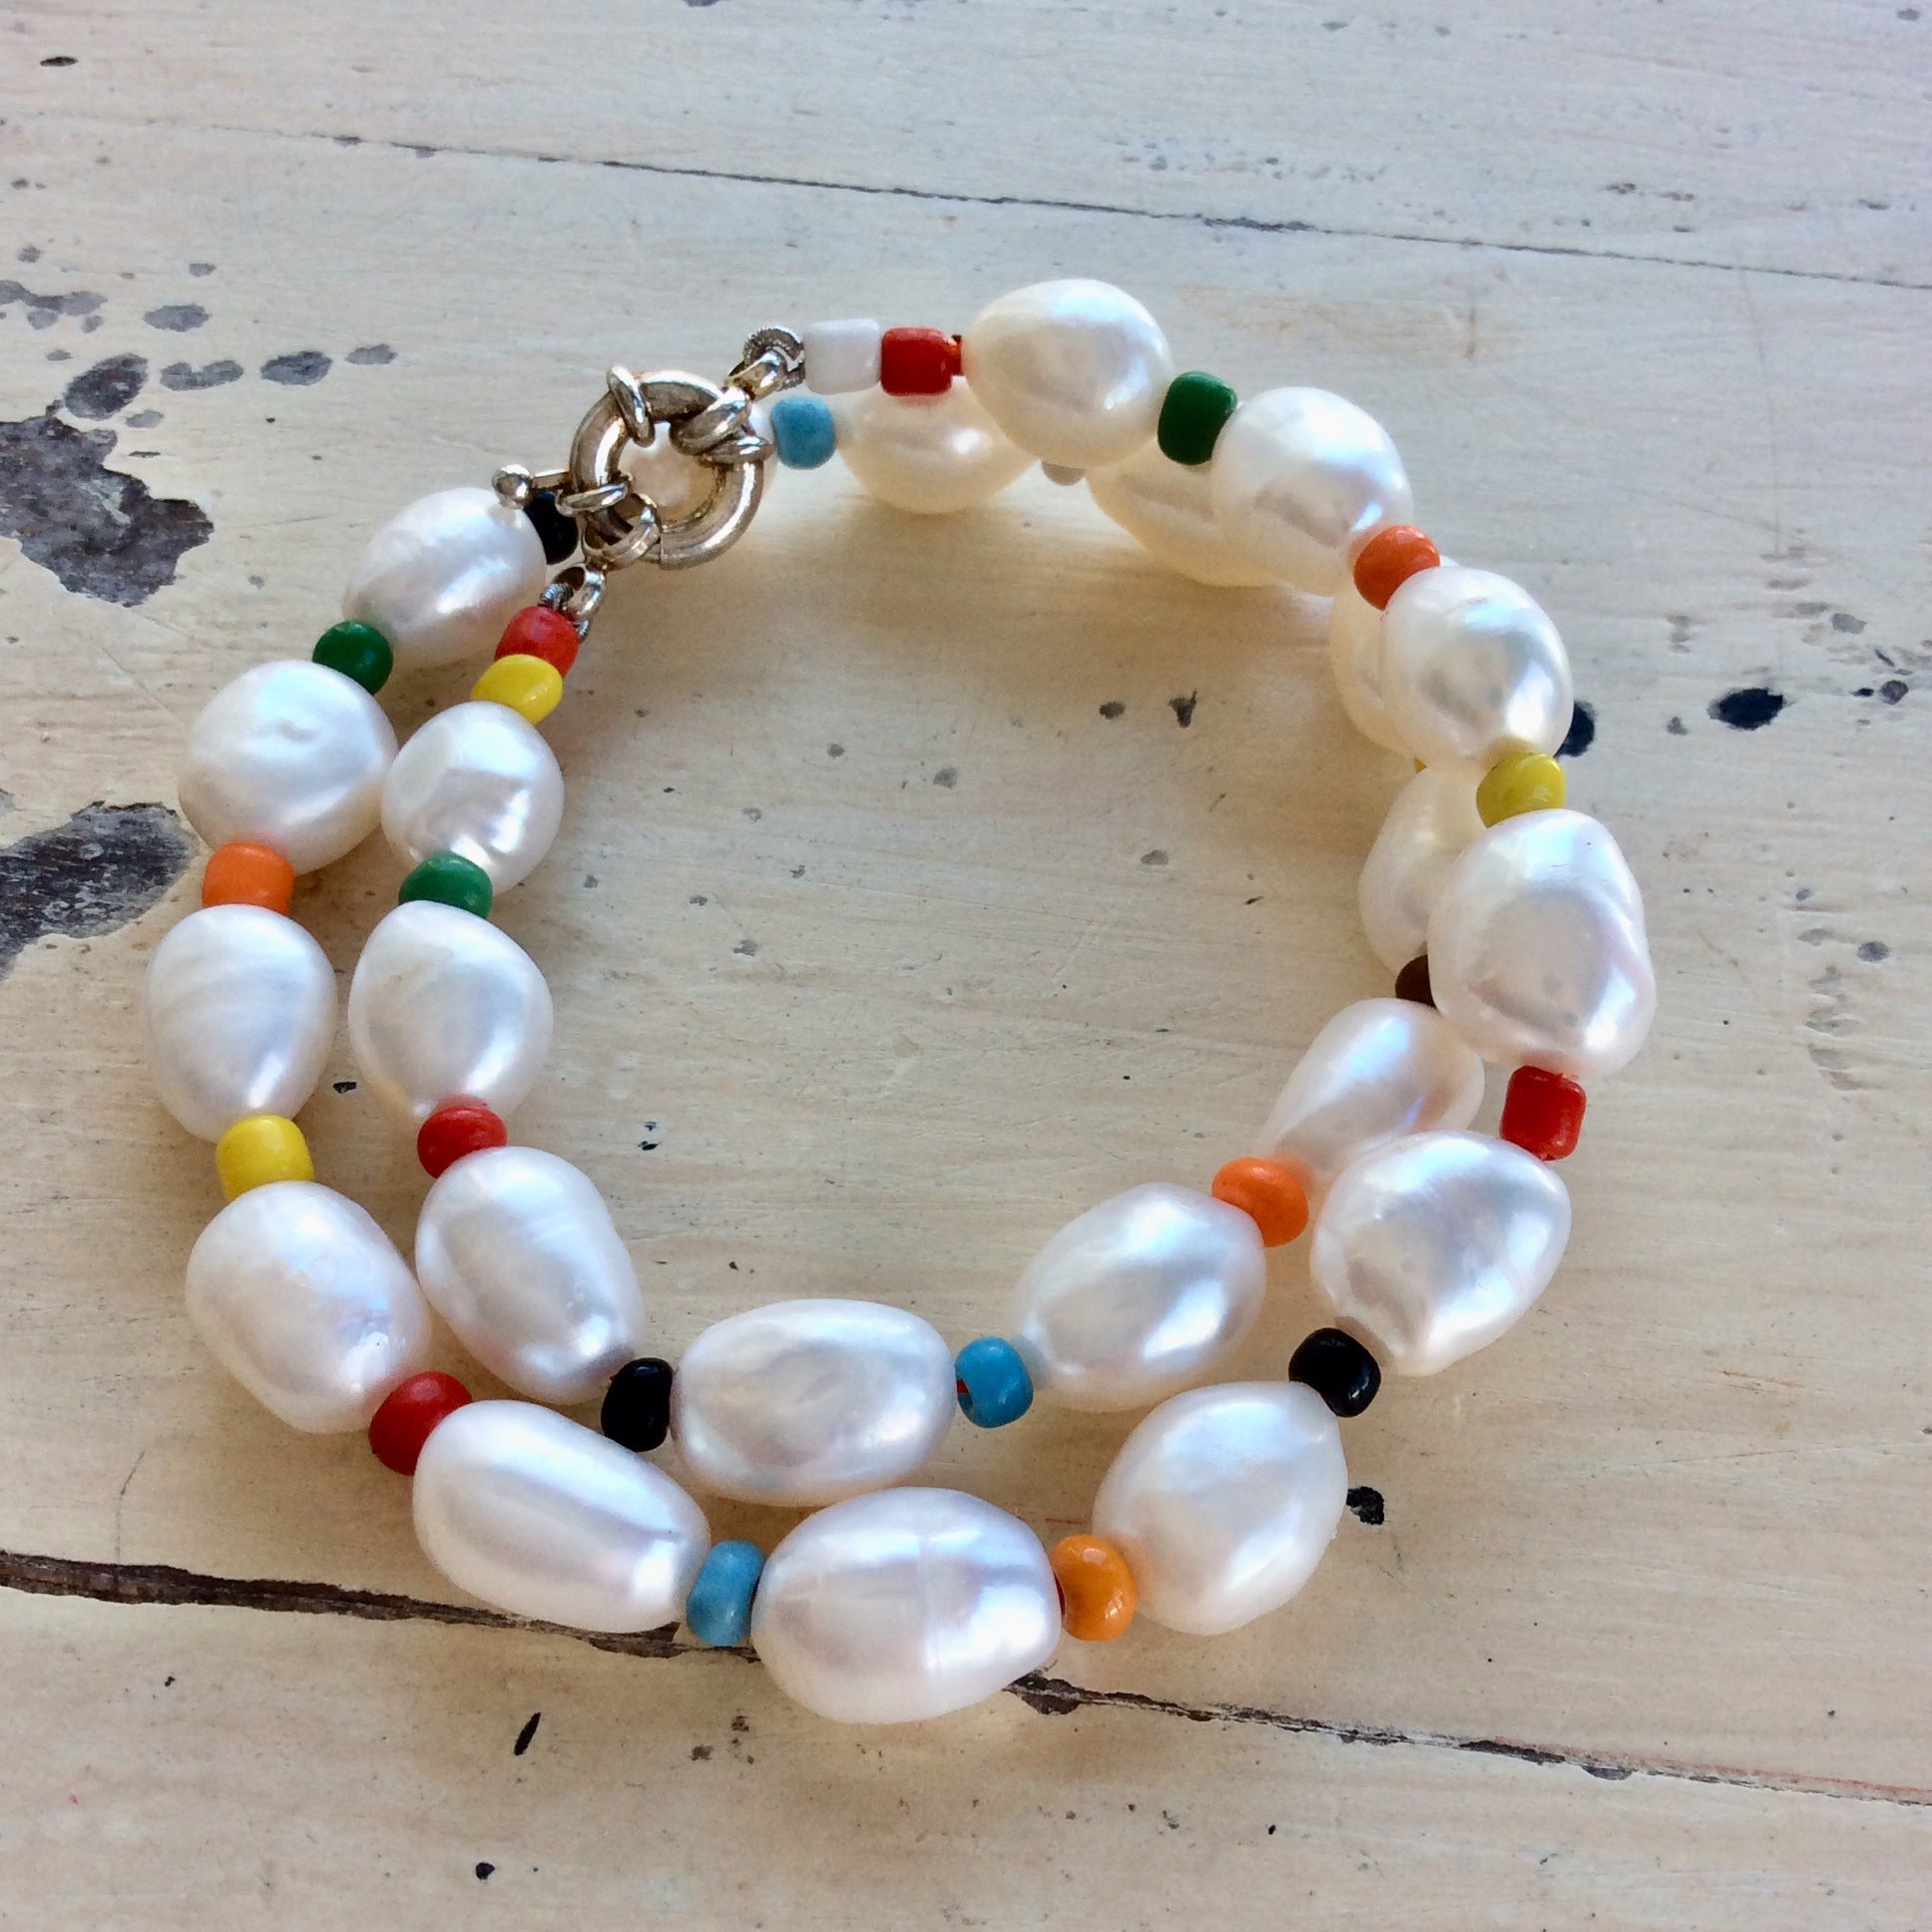 Pearls & African Glass Beads Necklace, Pearl Short Necklace, Bohemian Jewelry, Summer Jewelry, Beach Jewelry